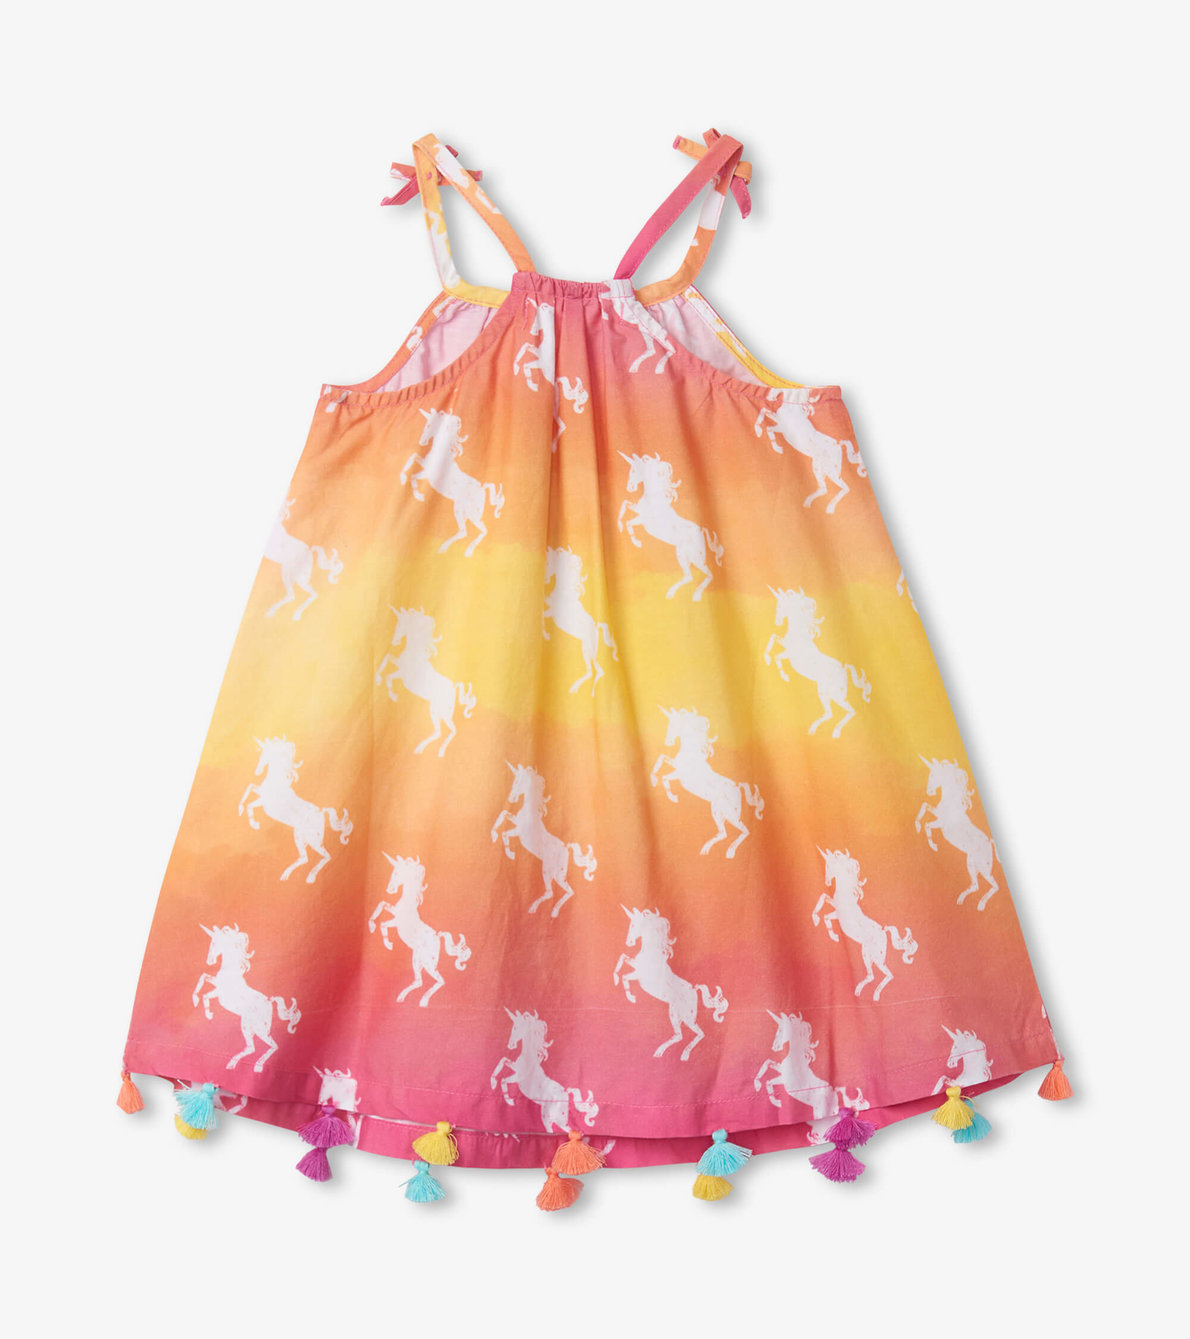 View larger image of Unicorn Silhouettes Baby Swing Dress